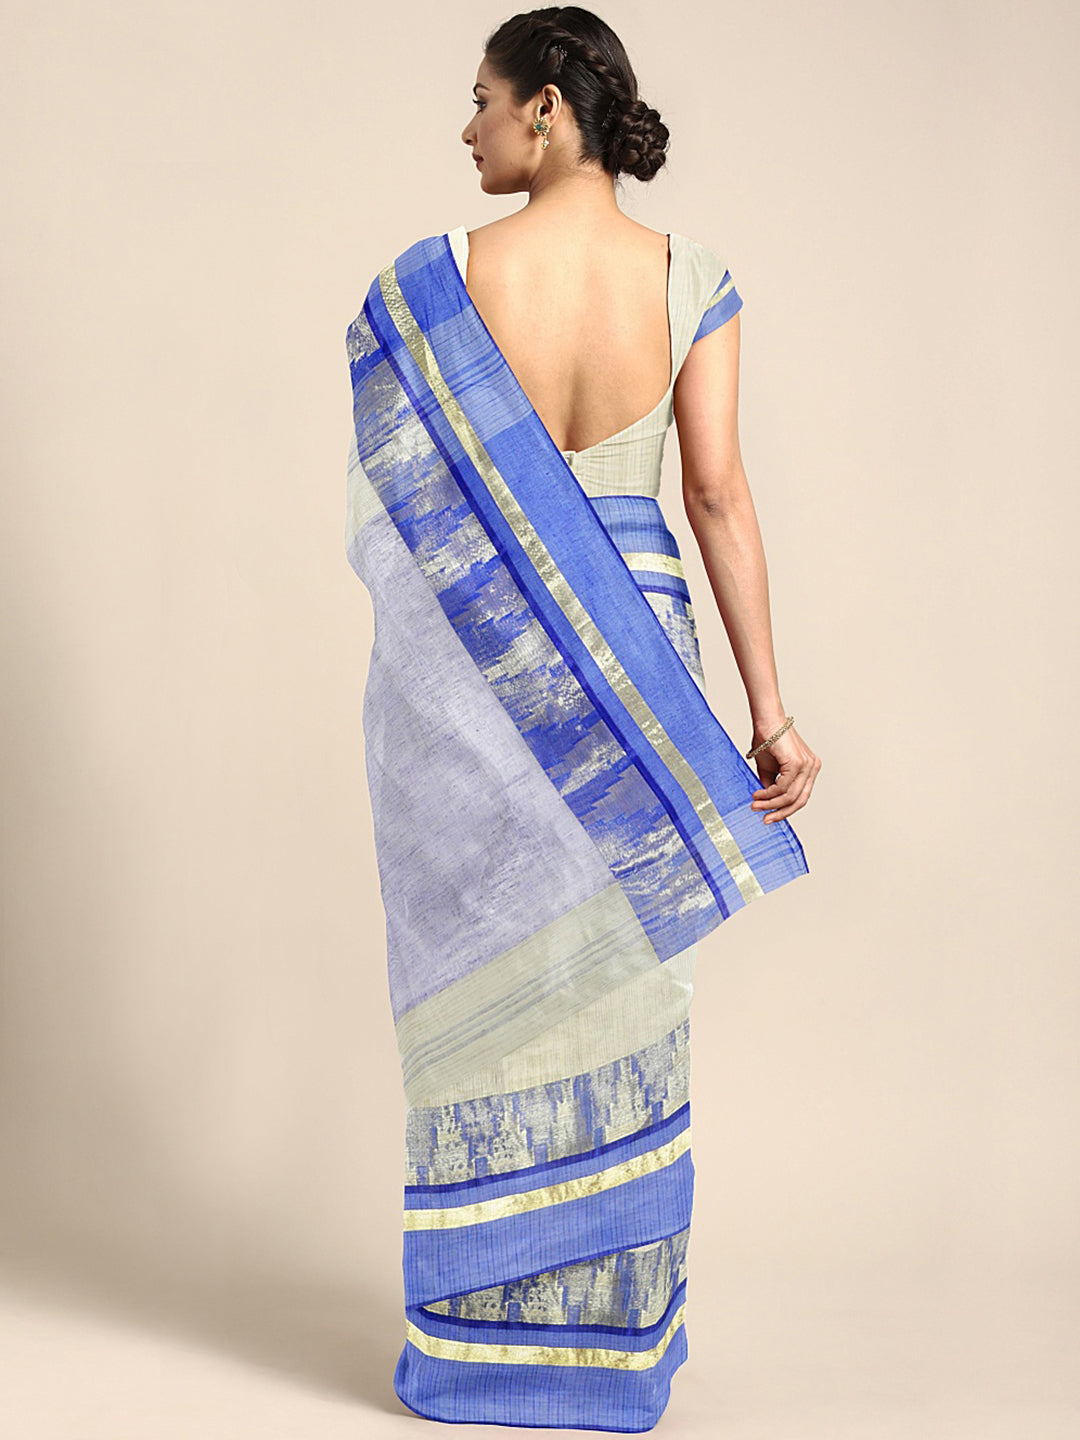 Purple Tant Woven Design Saree Without Blouse Piece DUTASA044 DUTASA044-Saree-Kalakari India-DUTASA044-Geographical Indication, Hand Crafted, Heritage Prints, Natural Dyes, Sarees, Silk Cotton, Sustainable Fabrics, Taant, Tant, West Bengal, Woven-[Linen,Ethnic,wear,Fashionista,Handloom,Handicraft,Indigo,blockprint,block,print,Cotton,Chanderi,Blue, latest,classy,party,bollywood,trendy,summer,style,traditional,formal,elegant,unique,style,hand,block,print, dabu,booti,gift,present,glamorous,affordab